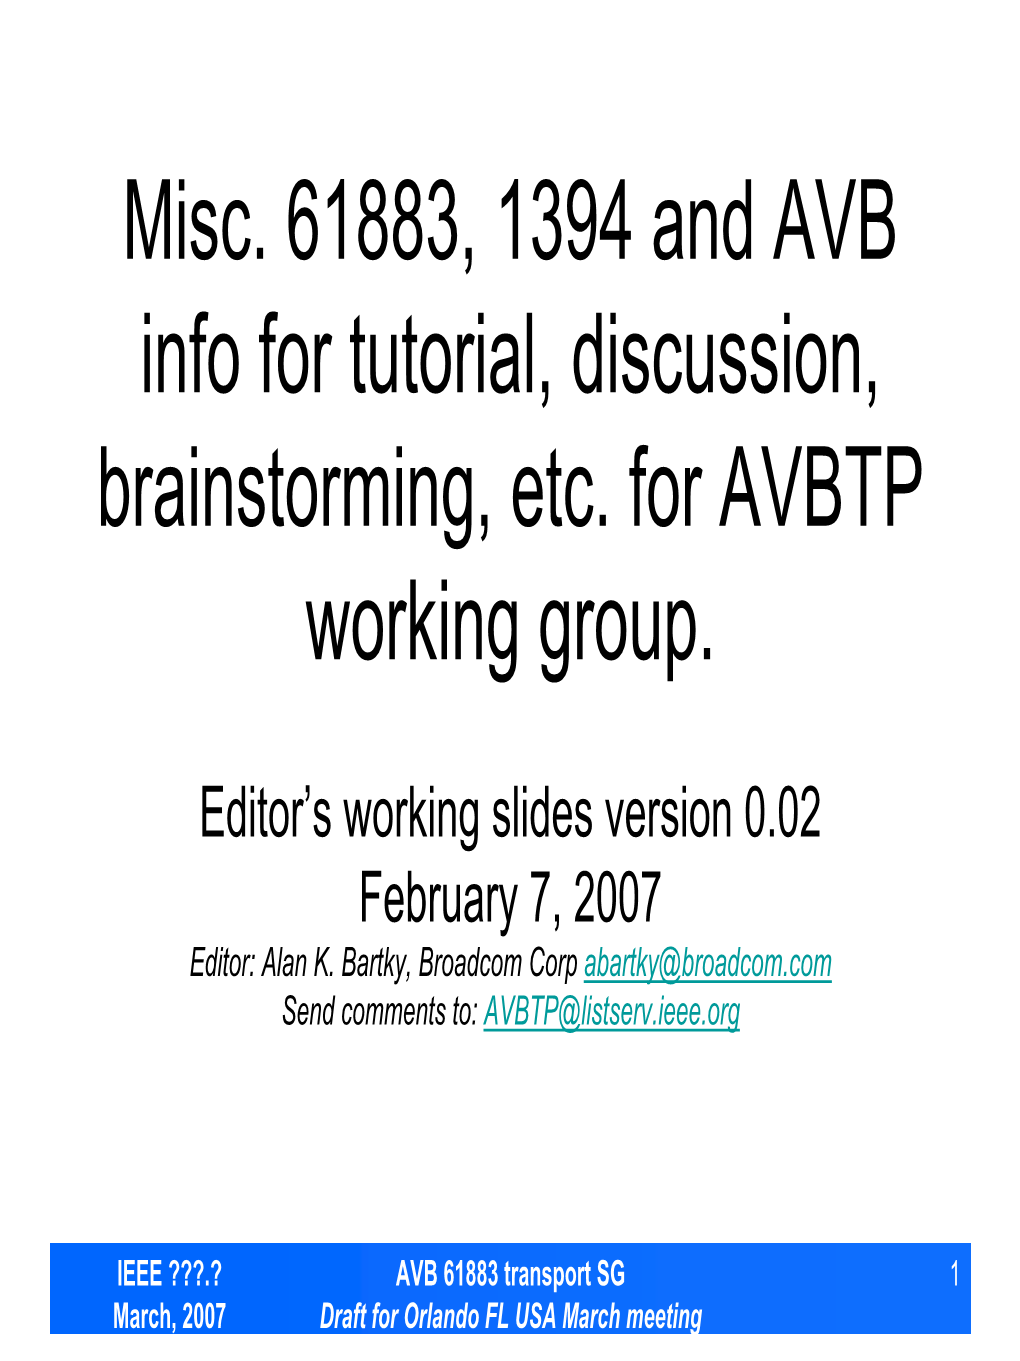 Misc. 61883, 1394 and AVB Info for Tutorial, Discussion, Brainstorming, Etc